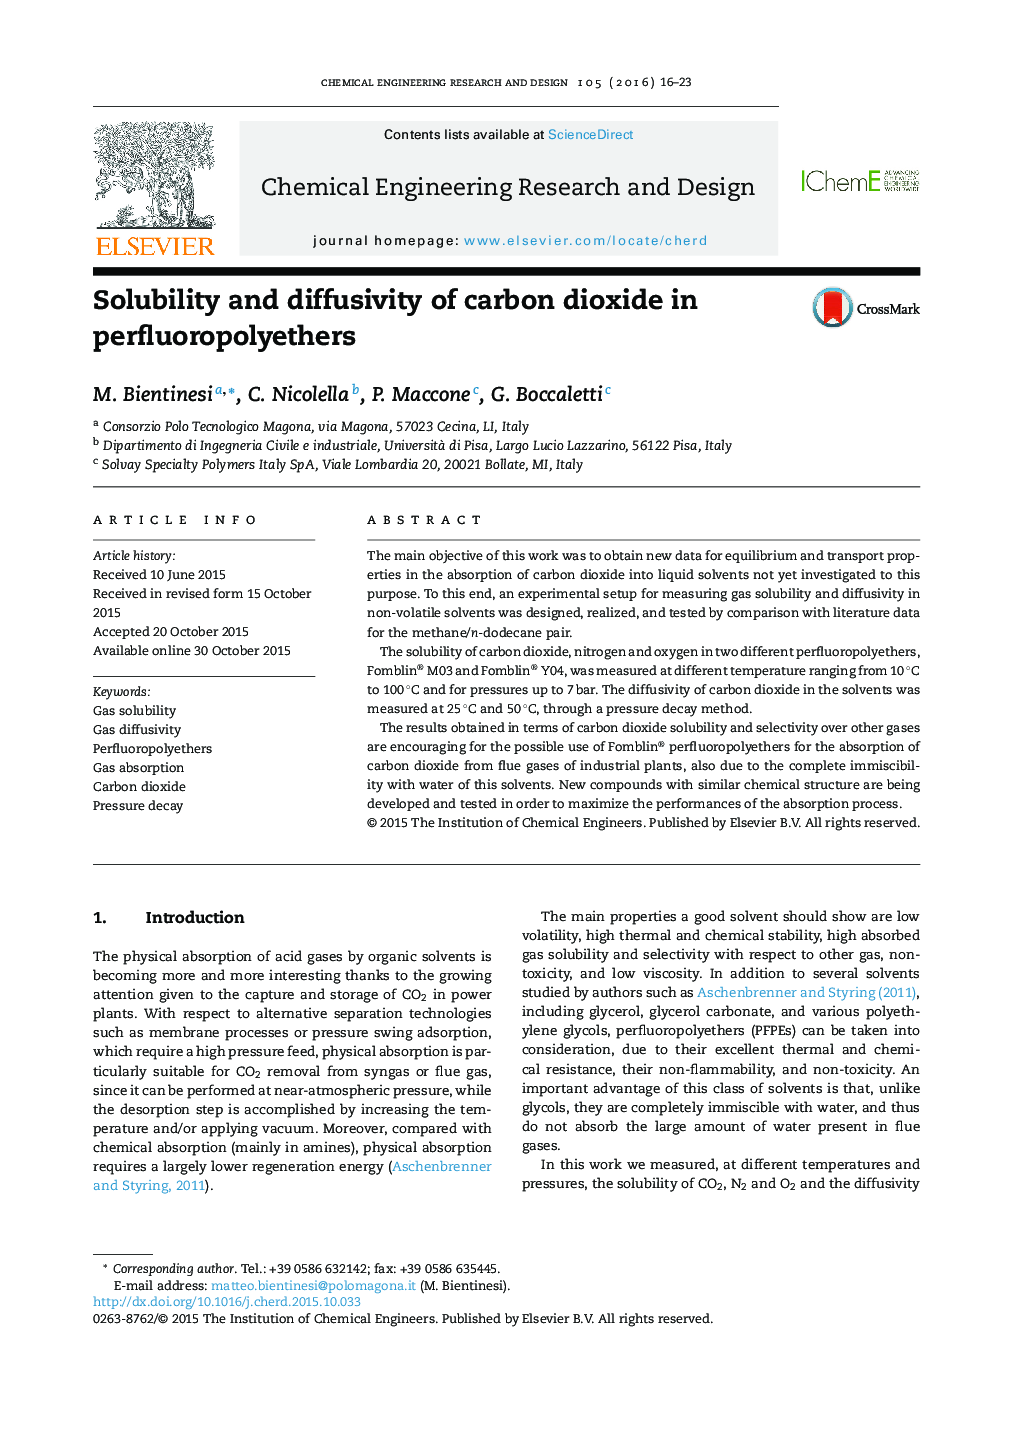 Solubility and diffusivity of carbon dioxide in perfluoropolyethers